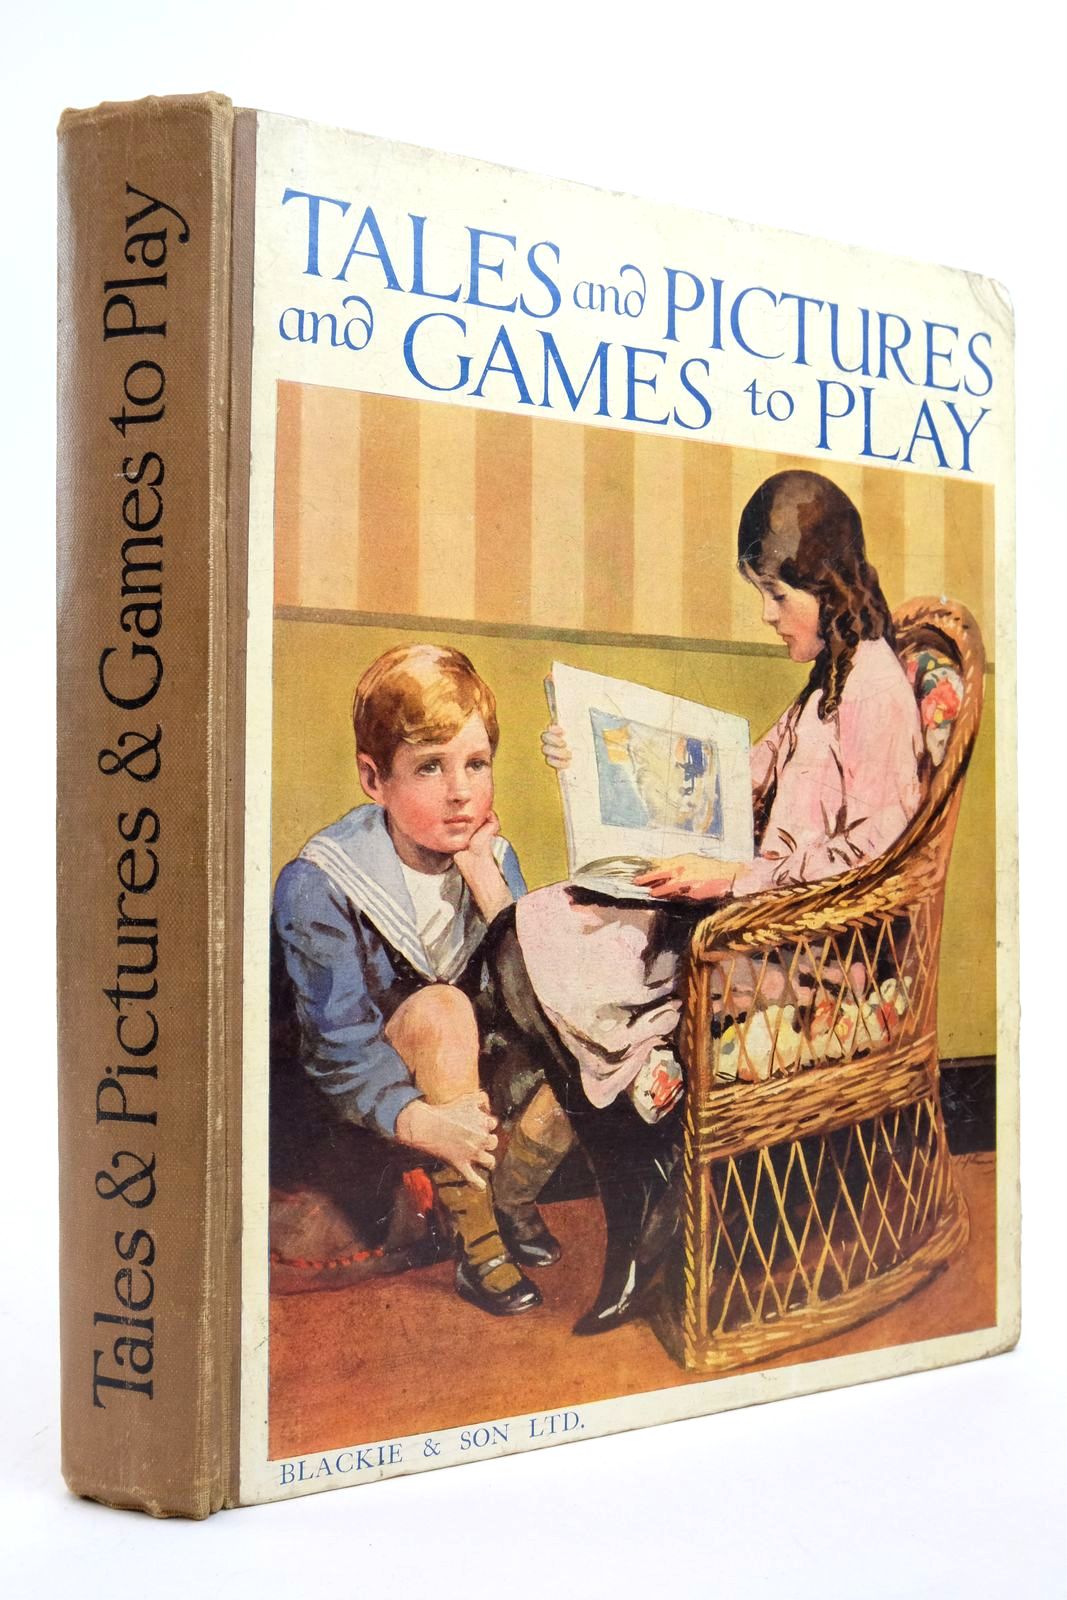 Photo of TALES AND PICTURES AND GAMES TO PLAY illustrated by Lambert, H.G.C. Marsh
Earnshaw, Harold
Adams, Frank
Woolley, Harry
et al., published by Blackie & Son Ltd. (STOCK CODE: 2138749)  for sale by Stella & Rose's Books